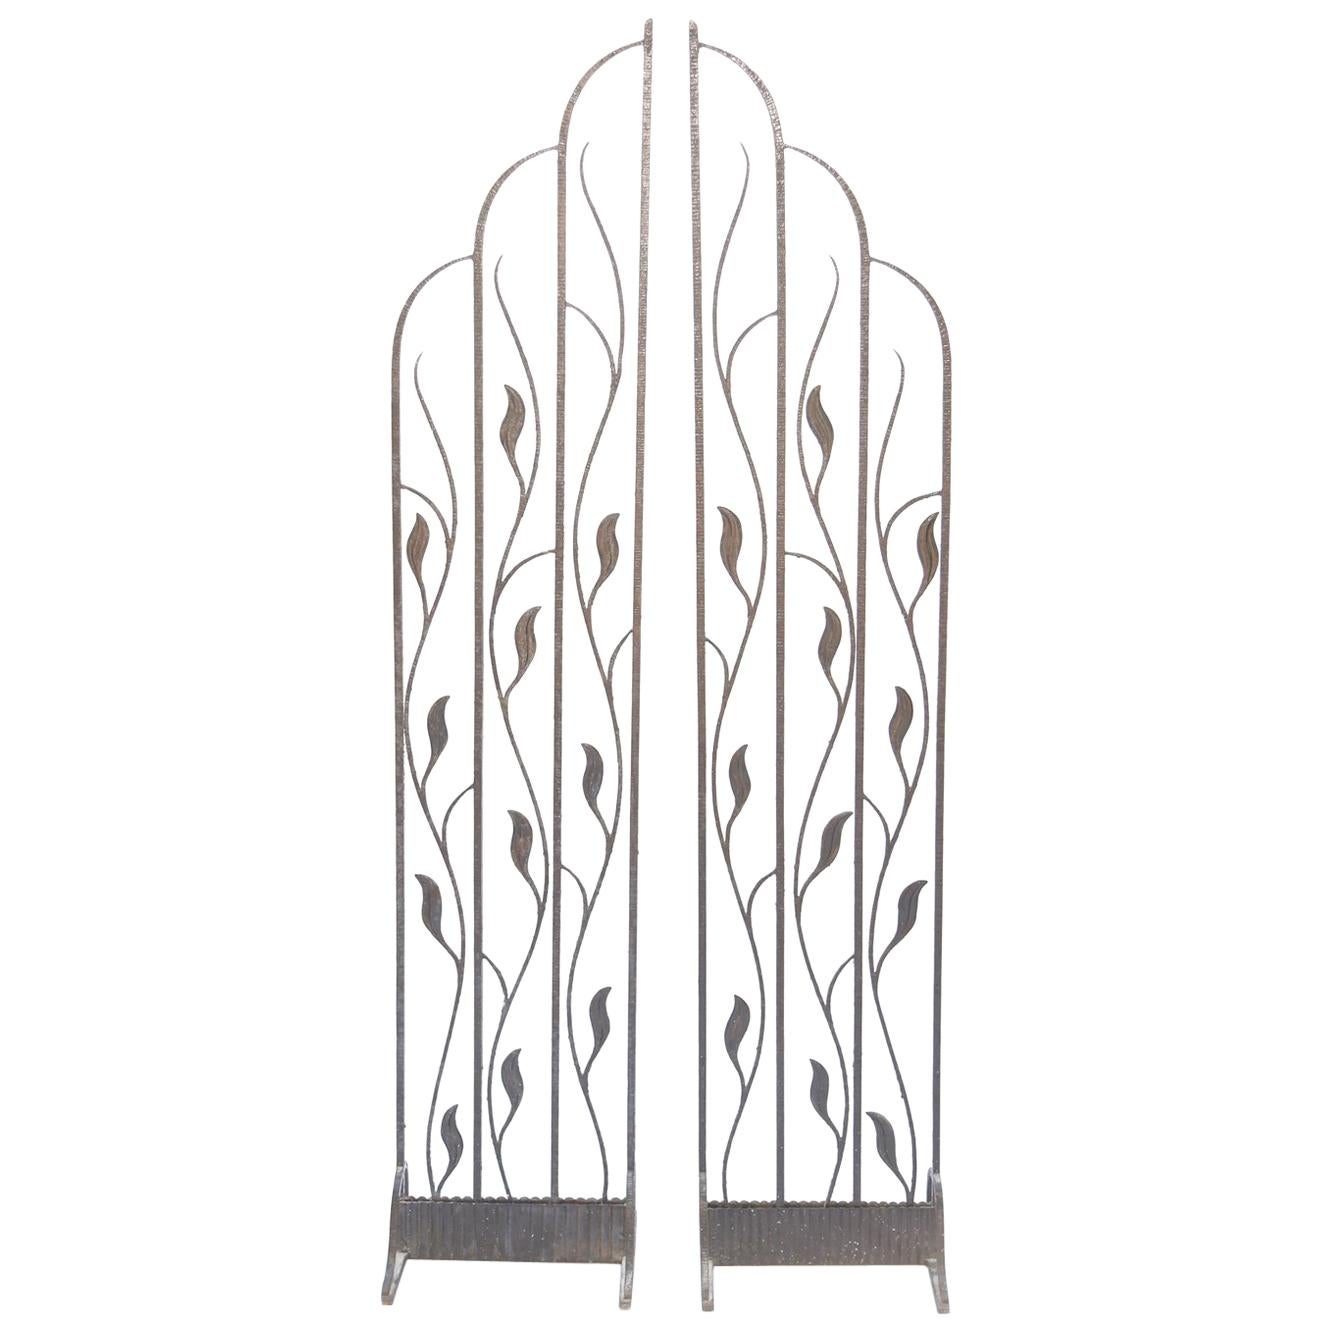 Pair of Art Deco Wrought Iron Room Dividers